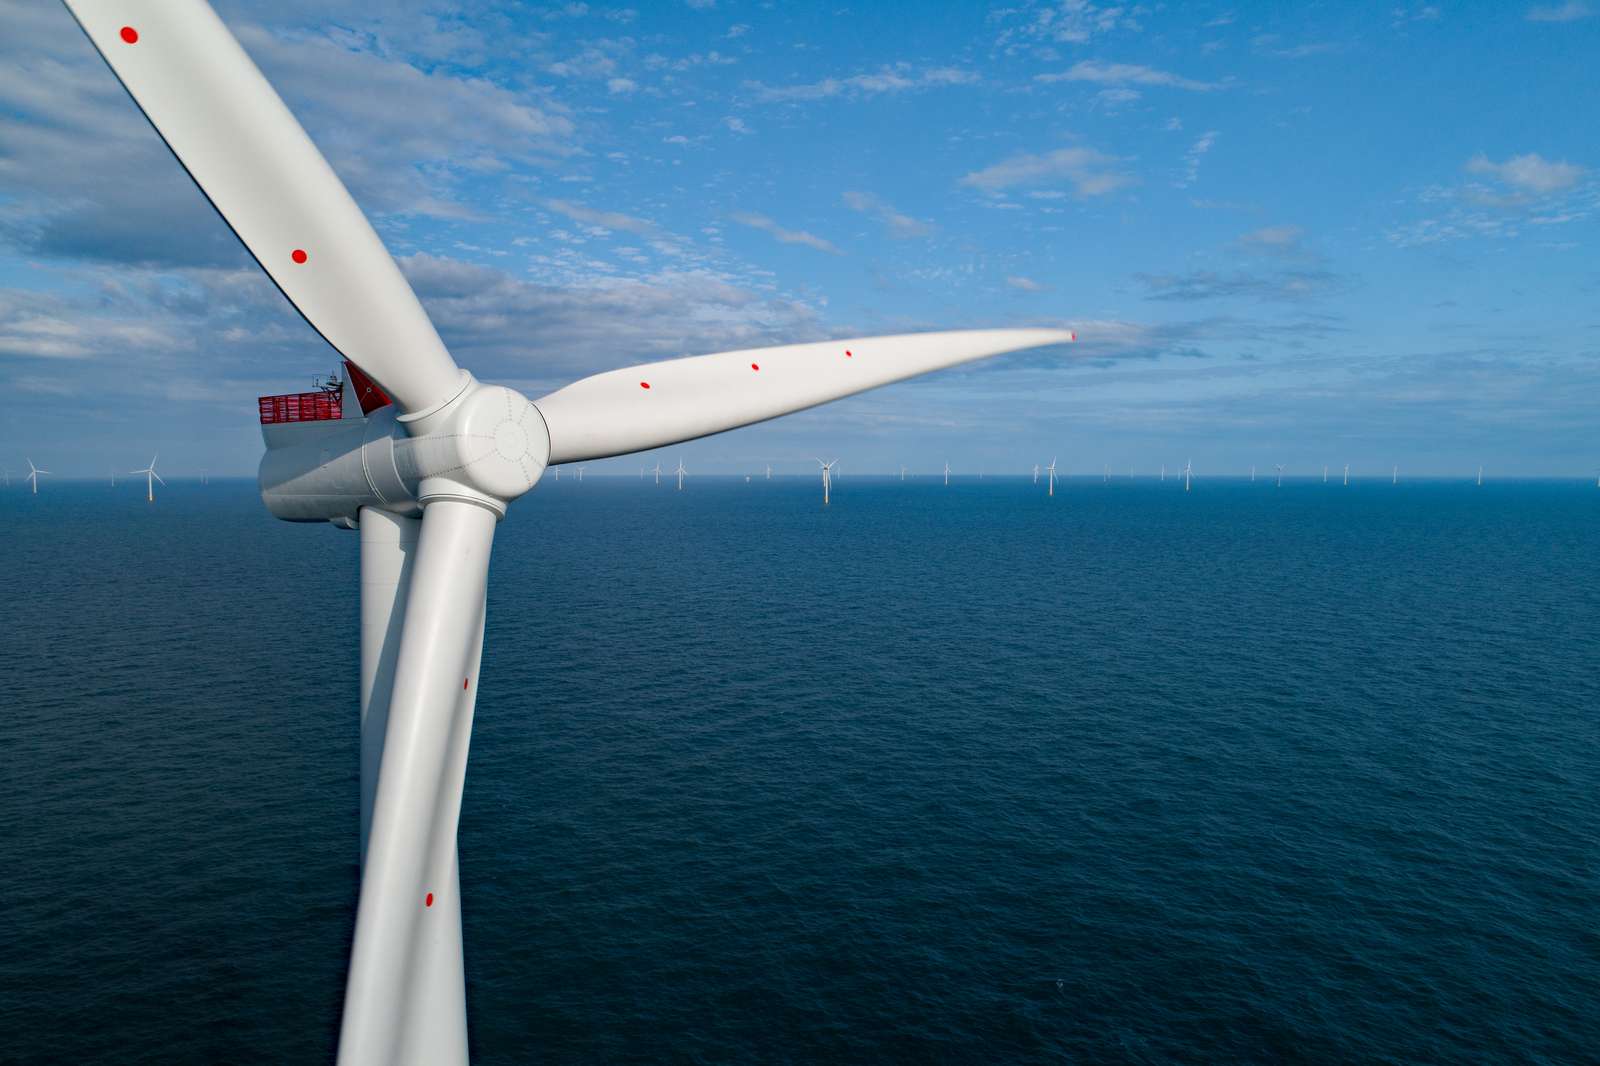 The facts on wind turbines, whales and New Jersey's future